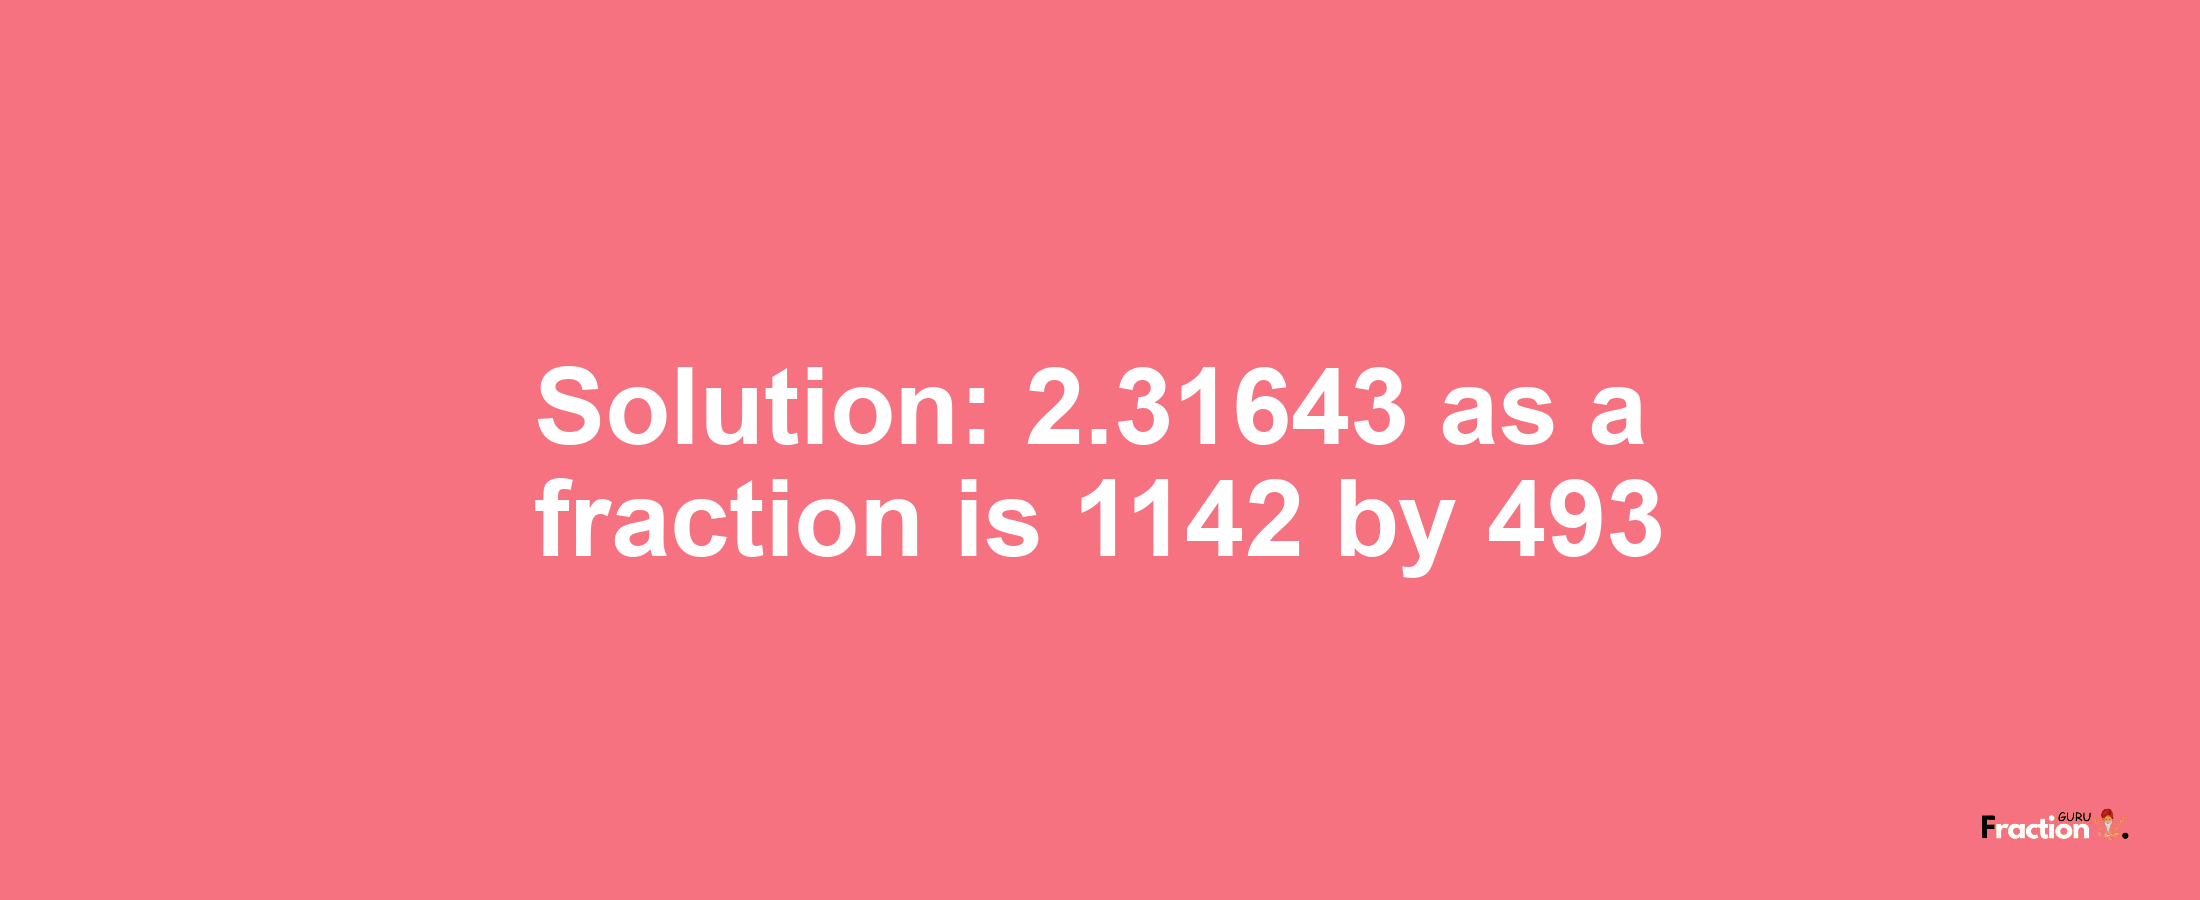 Solution:2.31643 as a fraction is 1142/493